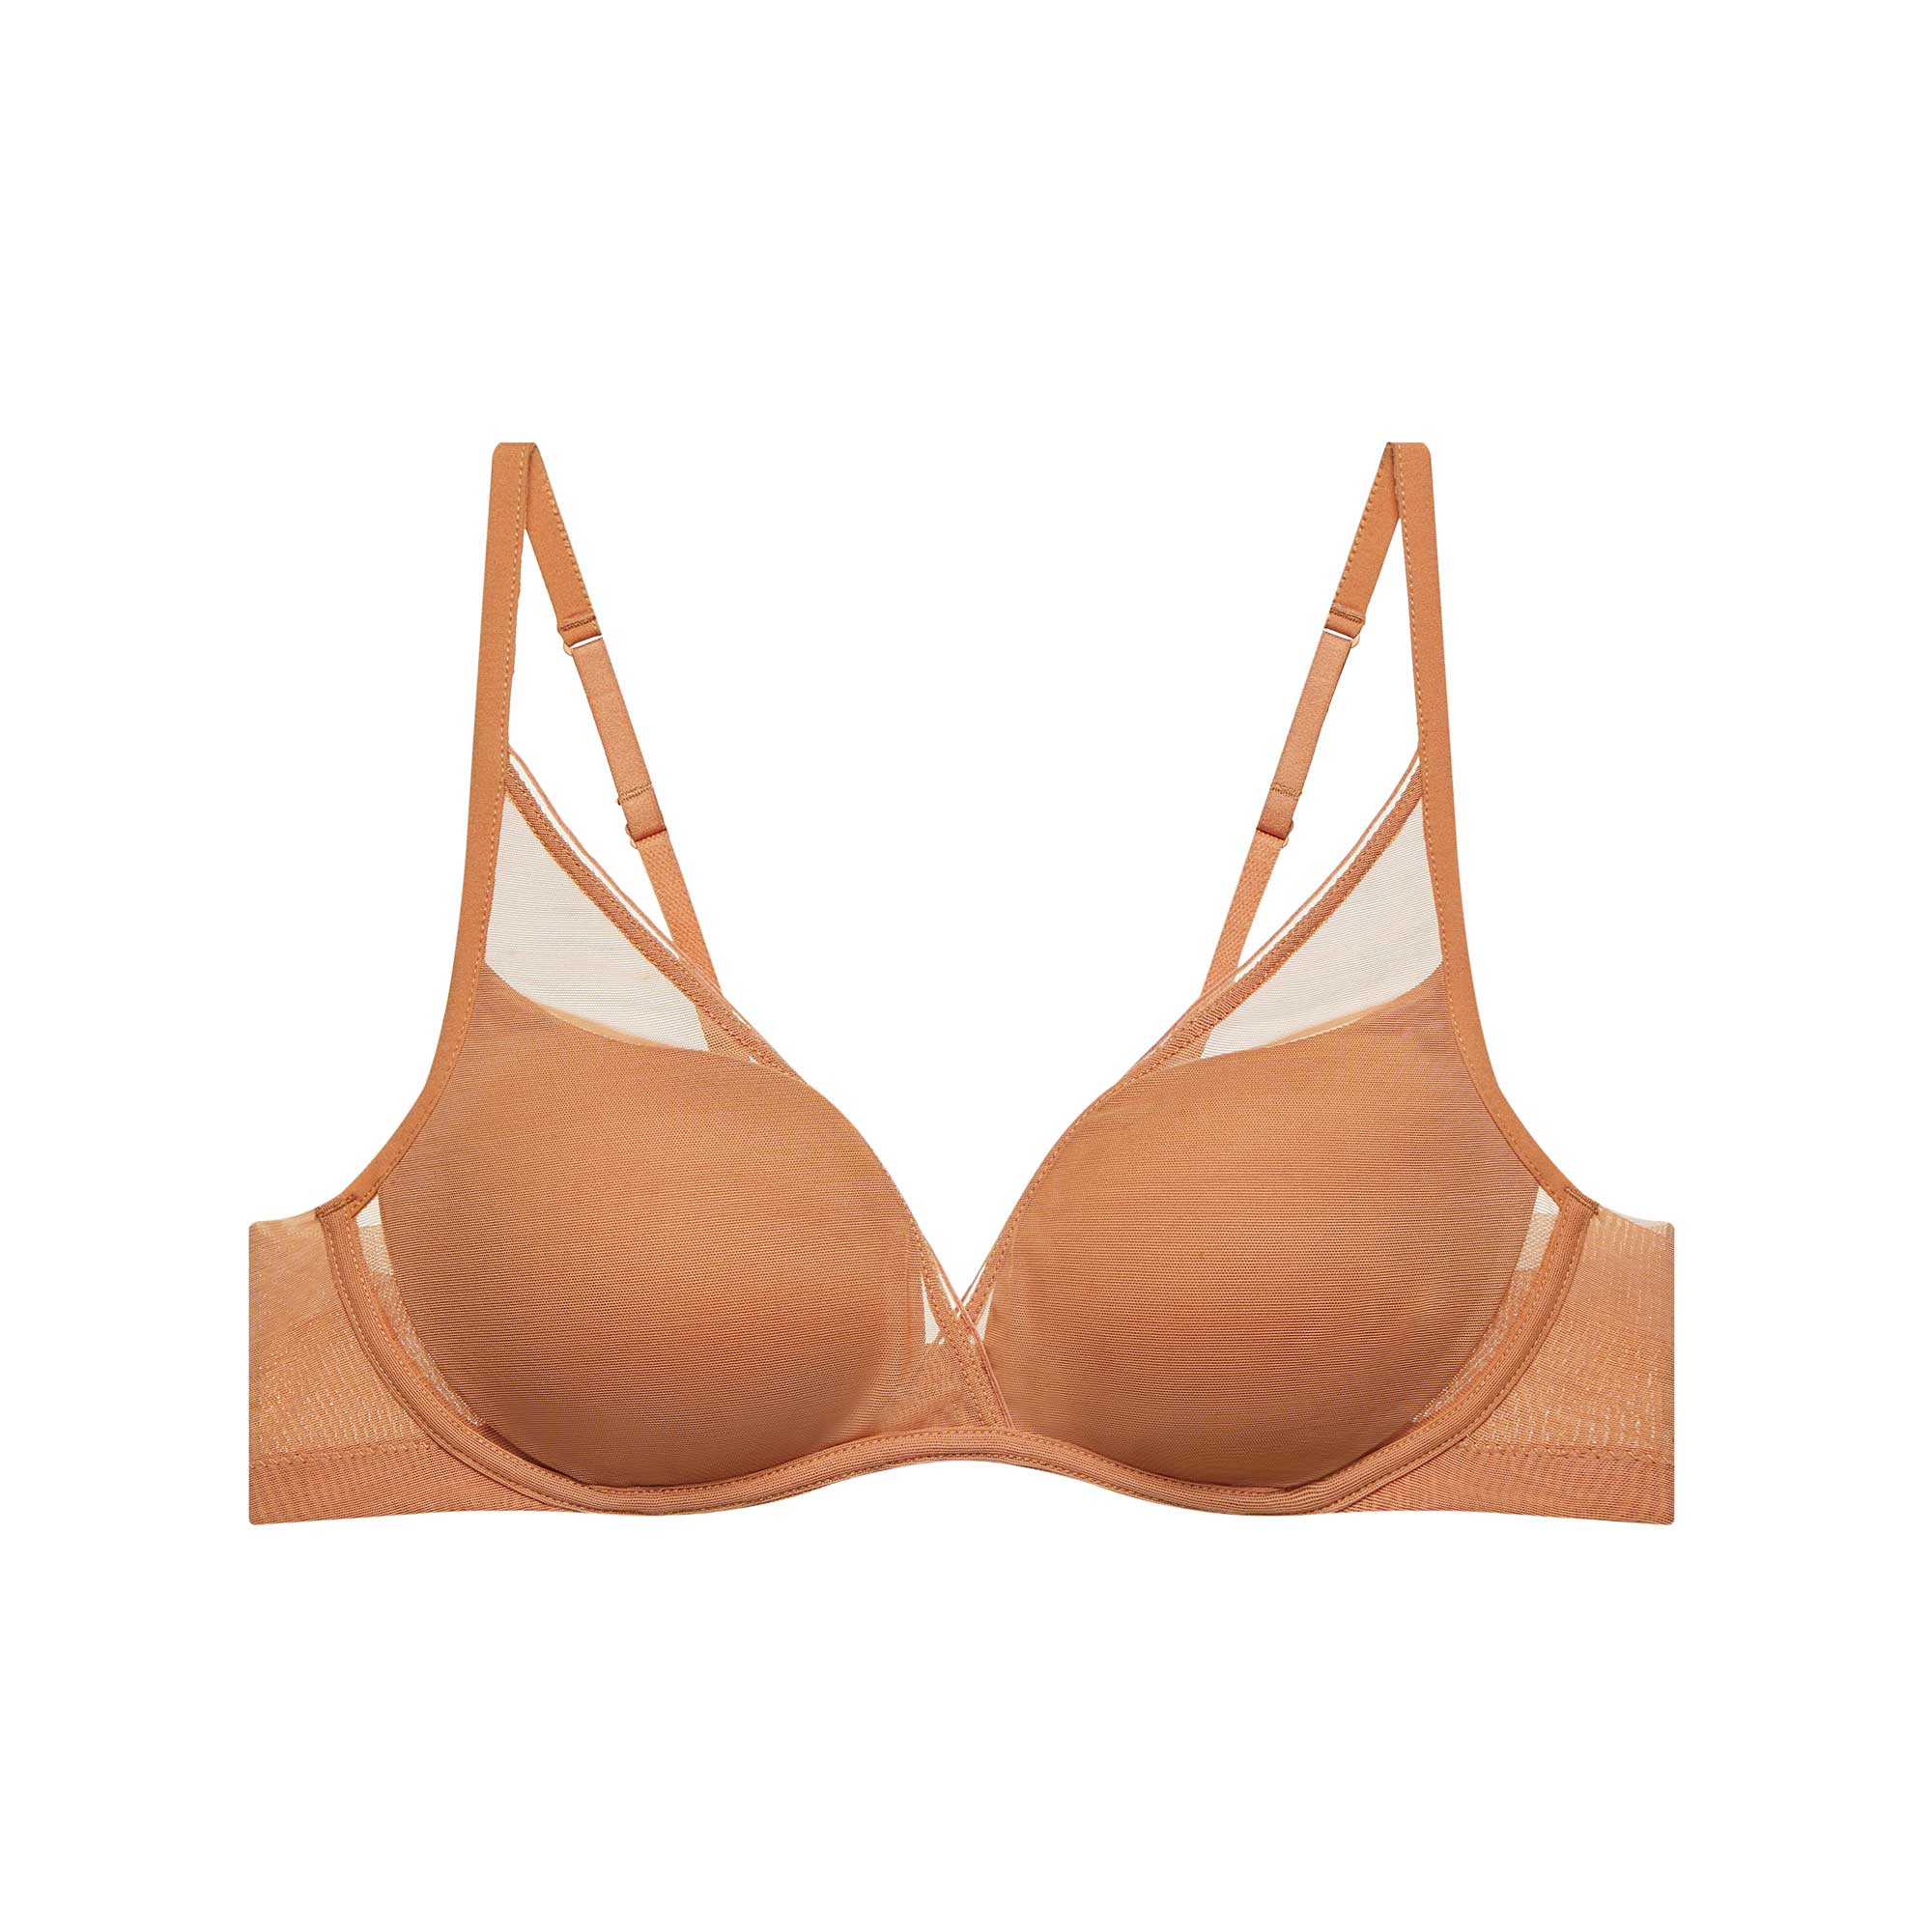 Flat lay image of a peach-colored bra with mesh overlay, plunge neckline, and thin straps